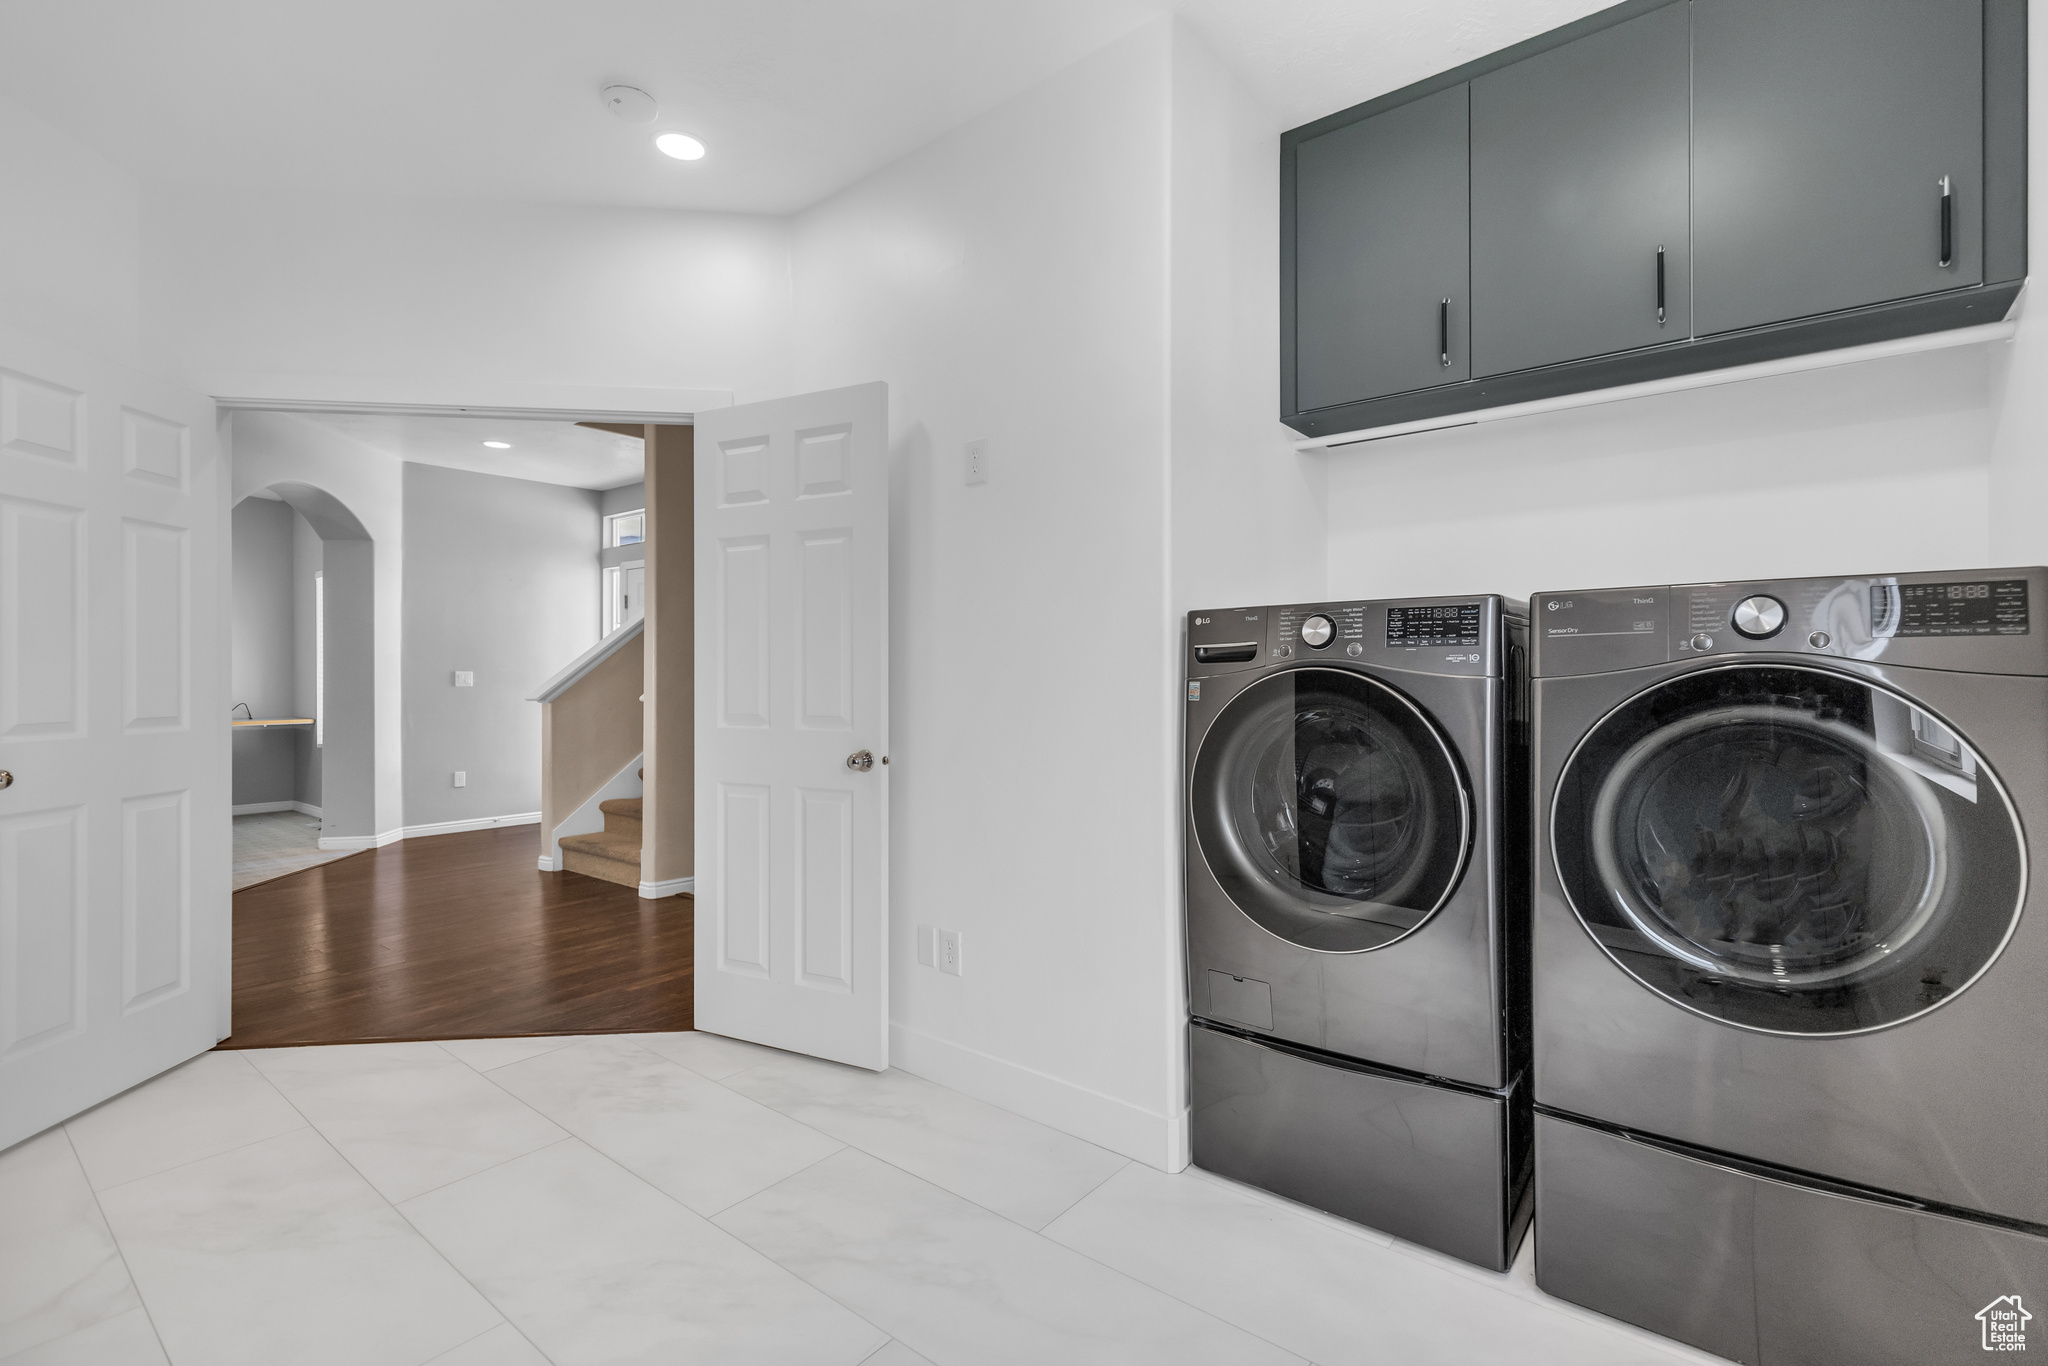 Clothes washing area with cabinets, independent washer and dryer, and light tile floors